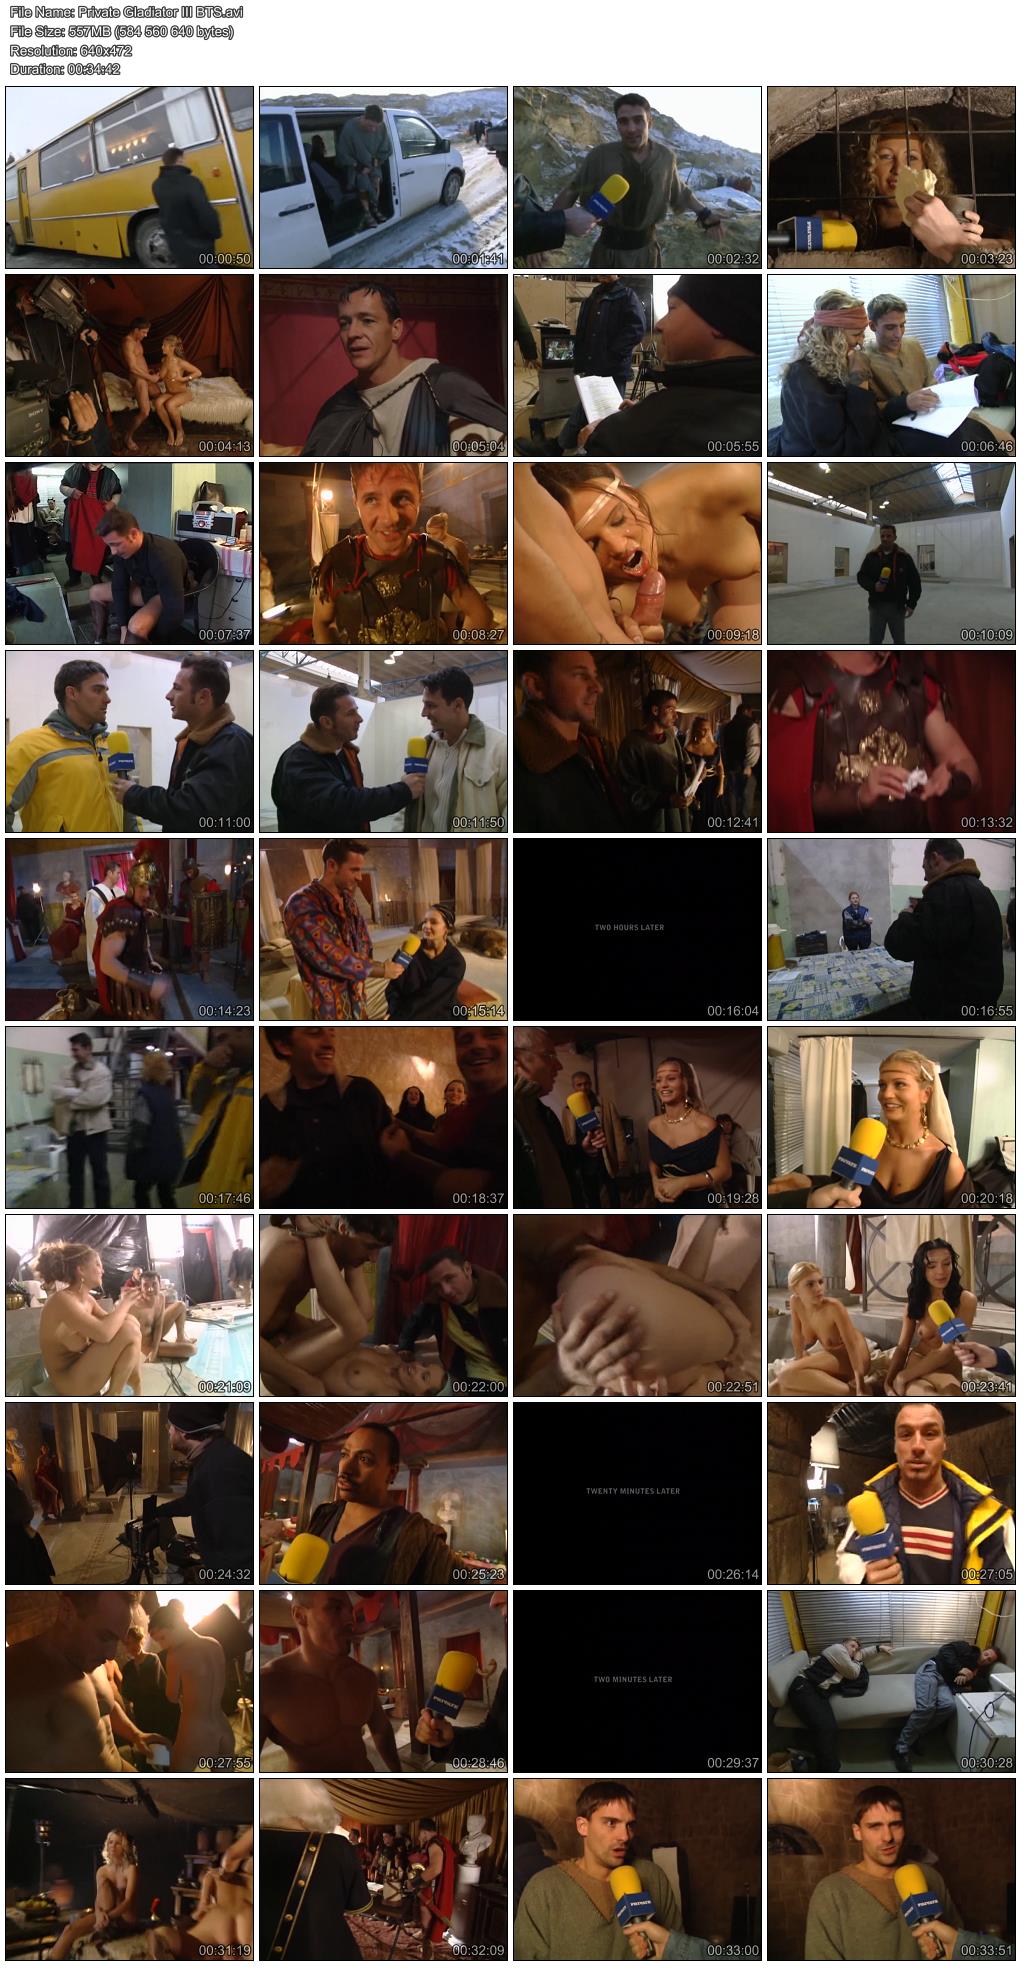 Private Gladiator III - Sexual Conquest (2002) DVDRip » Download ...